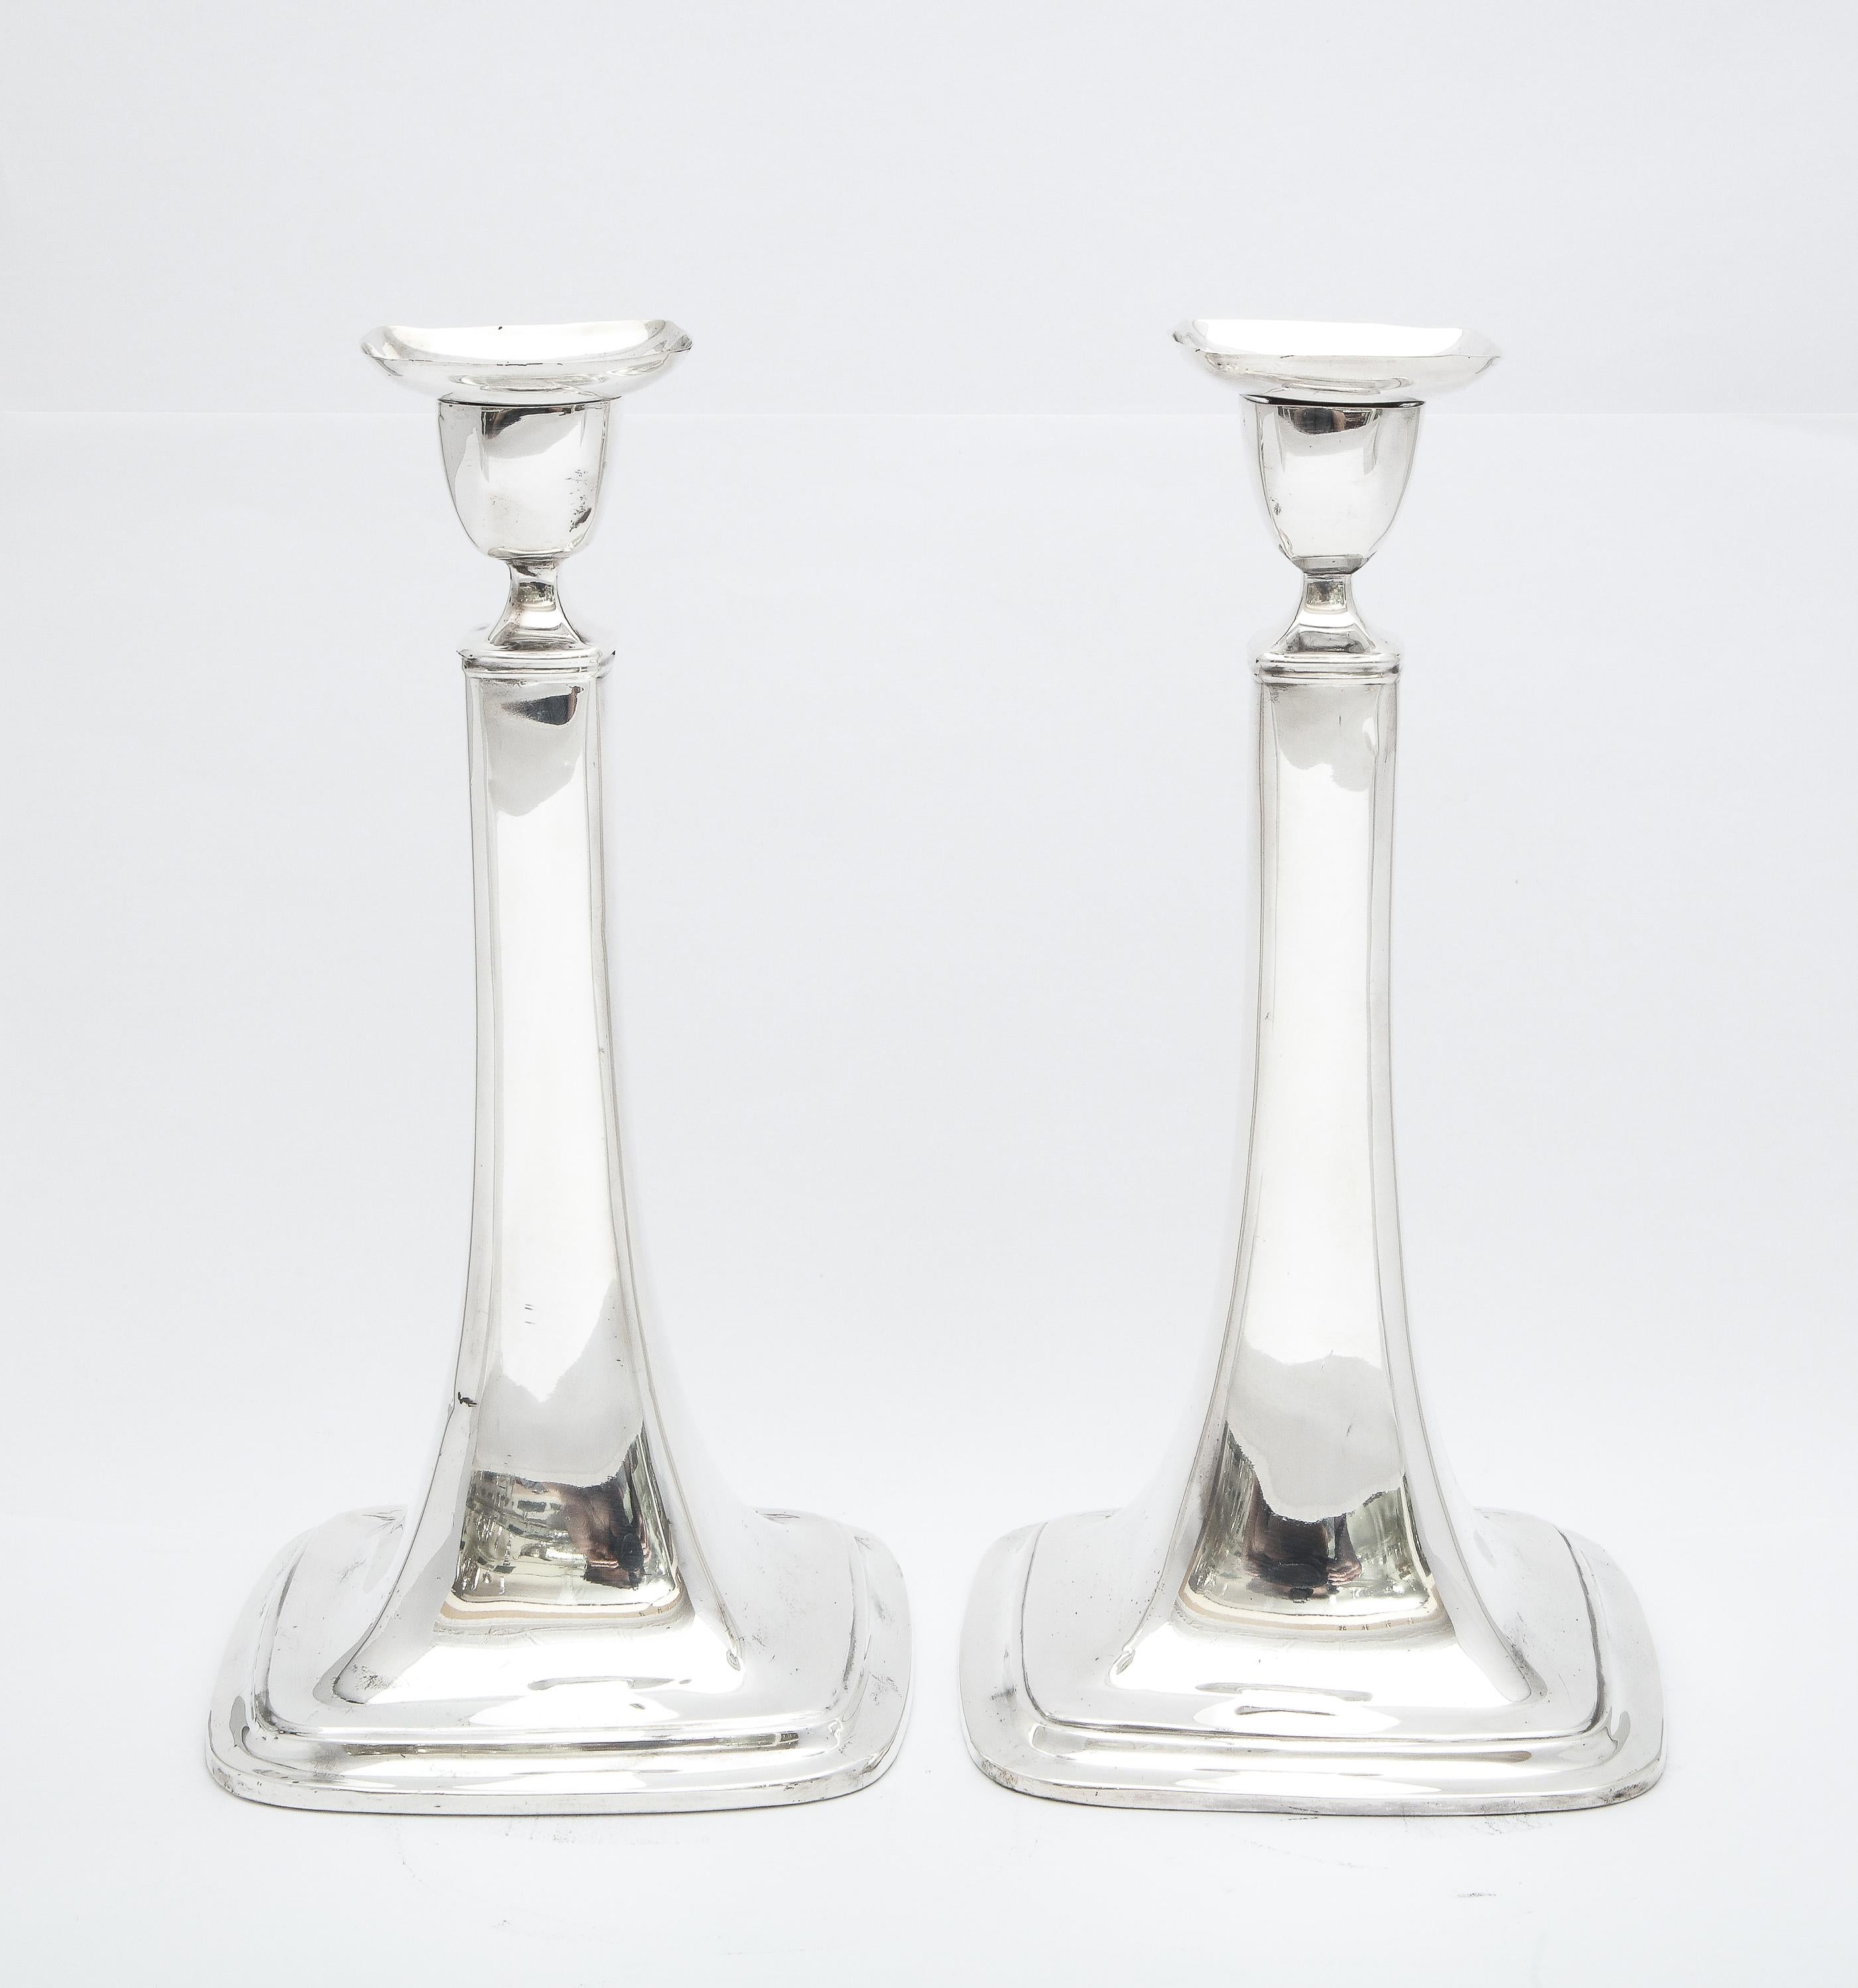 Tall Pair of Edwardian Period Sterling Silver Candlesticks 4